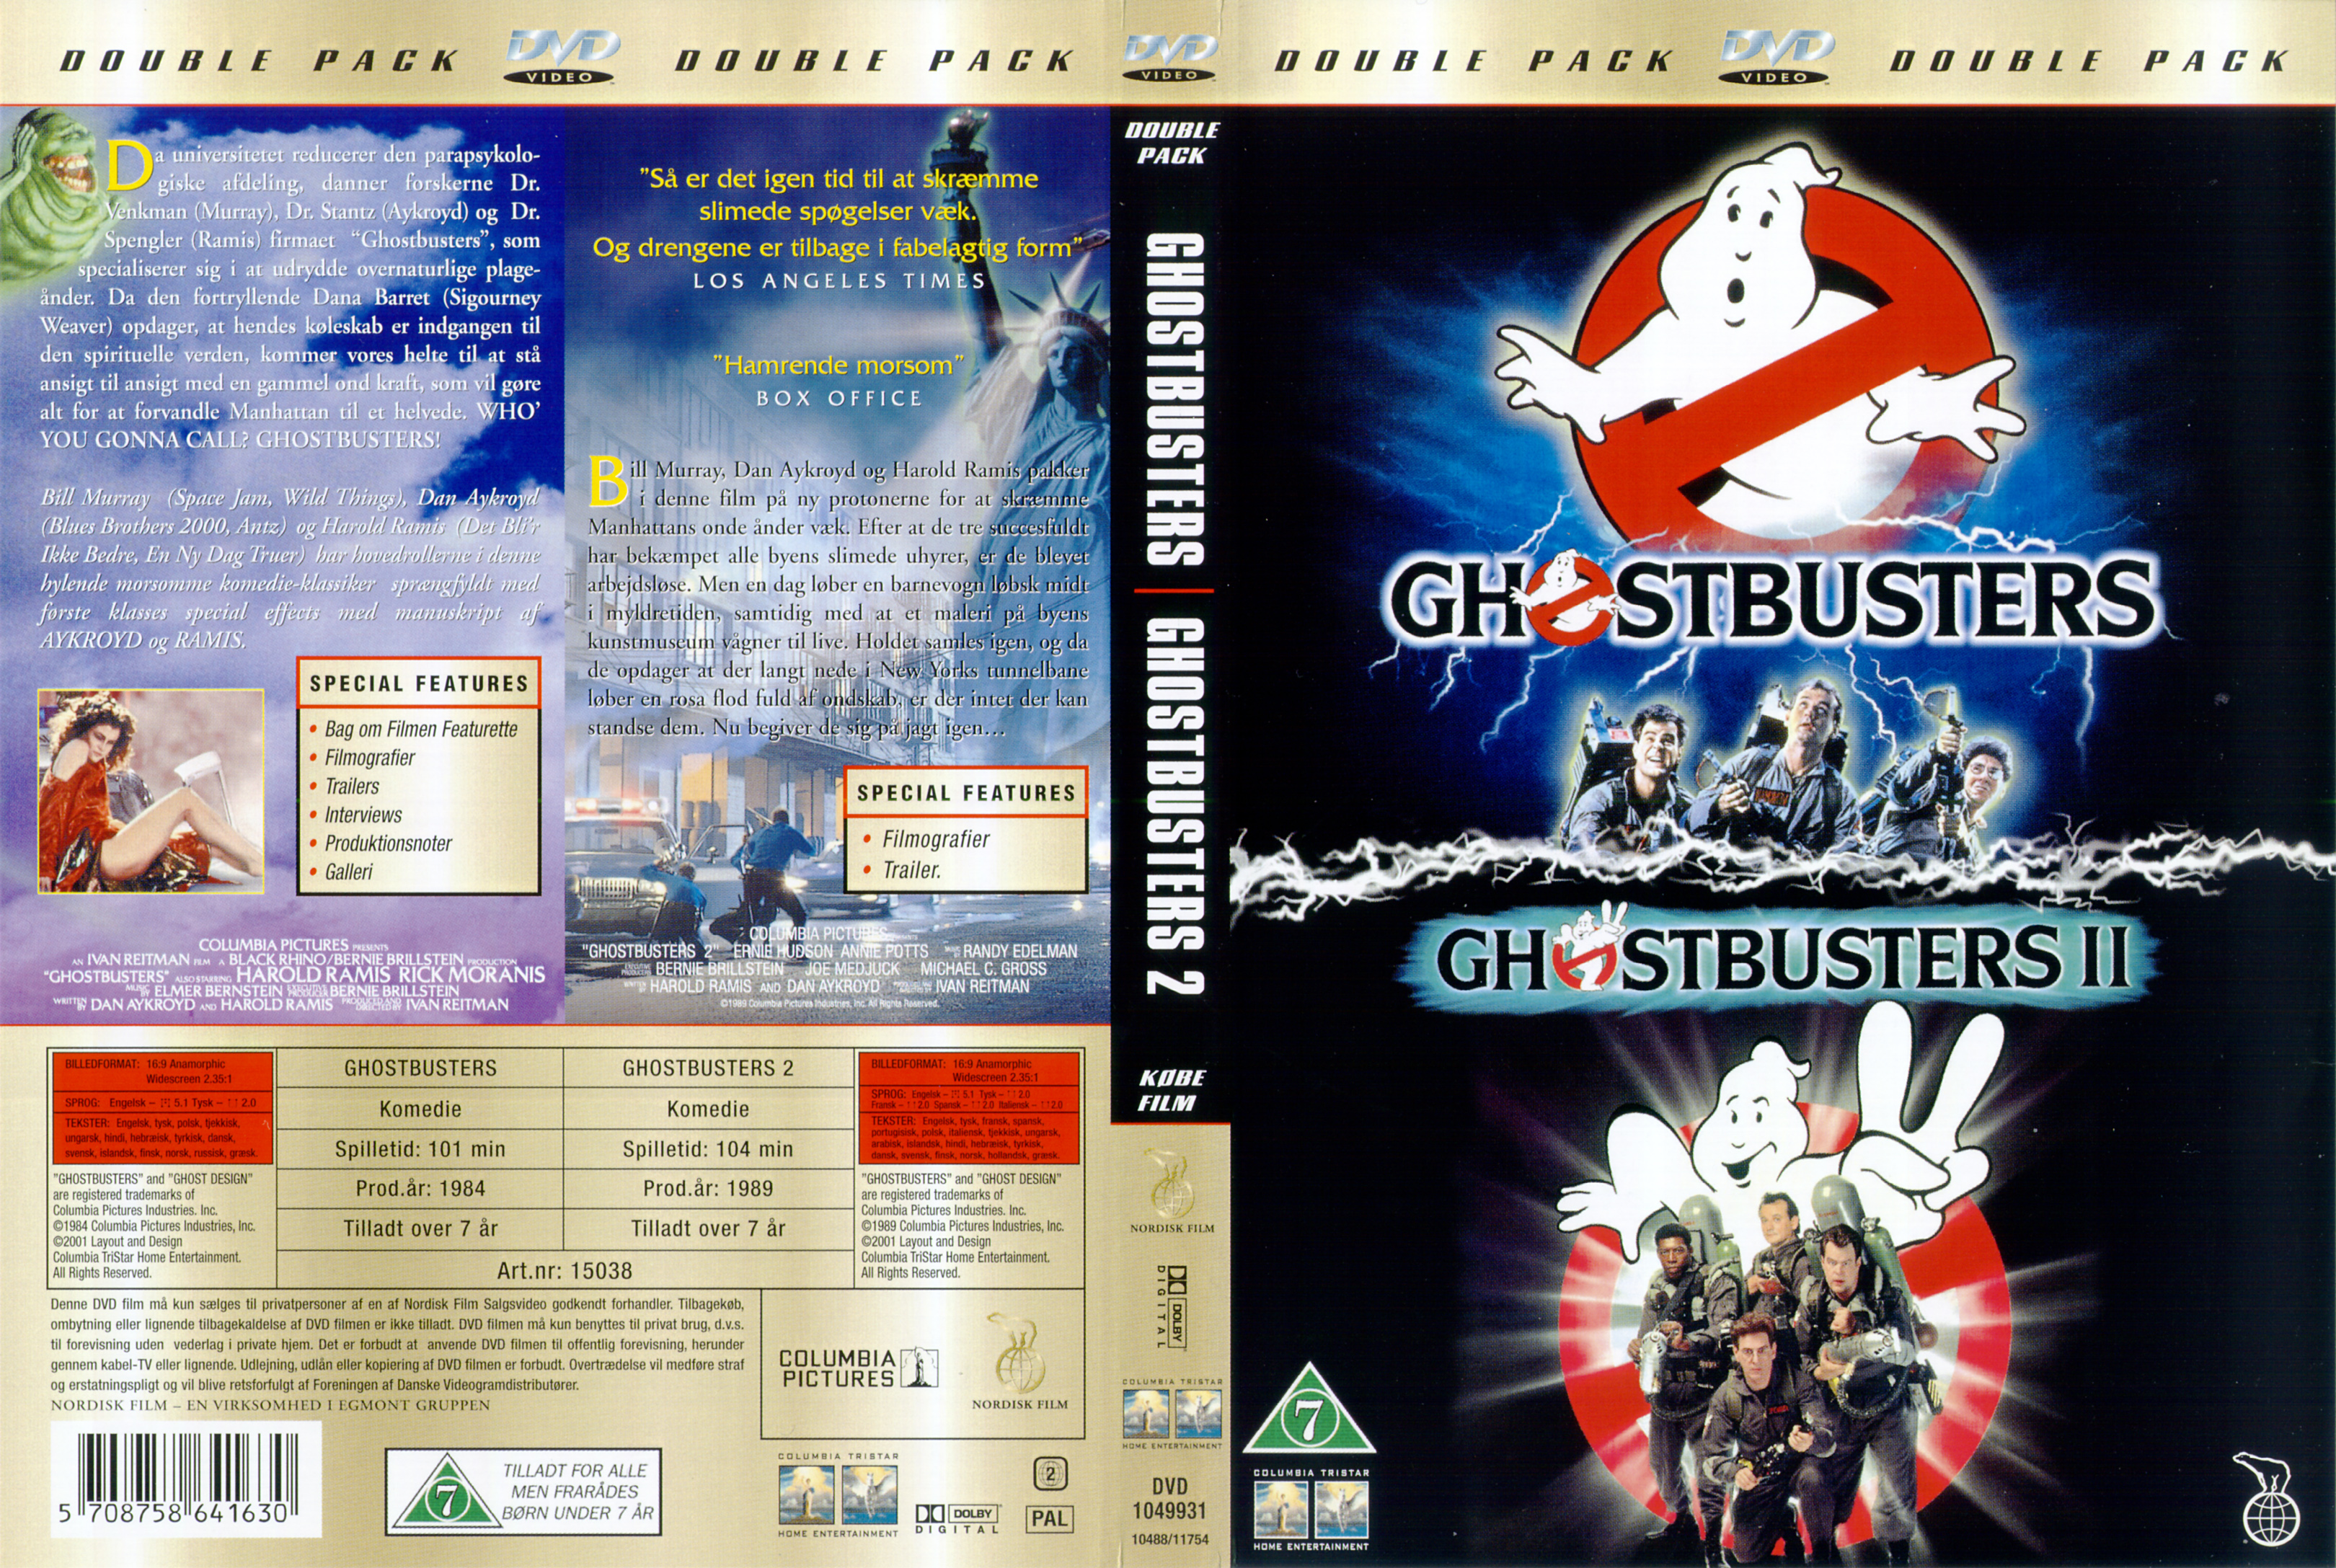 Ghostbusters Dvd Cover